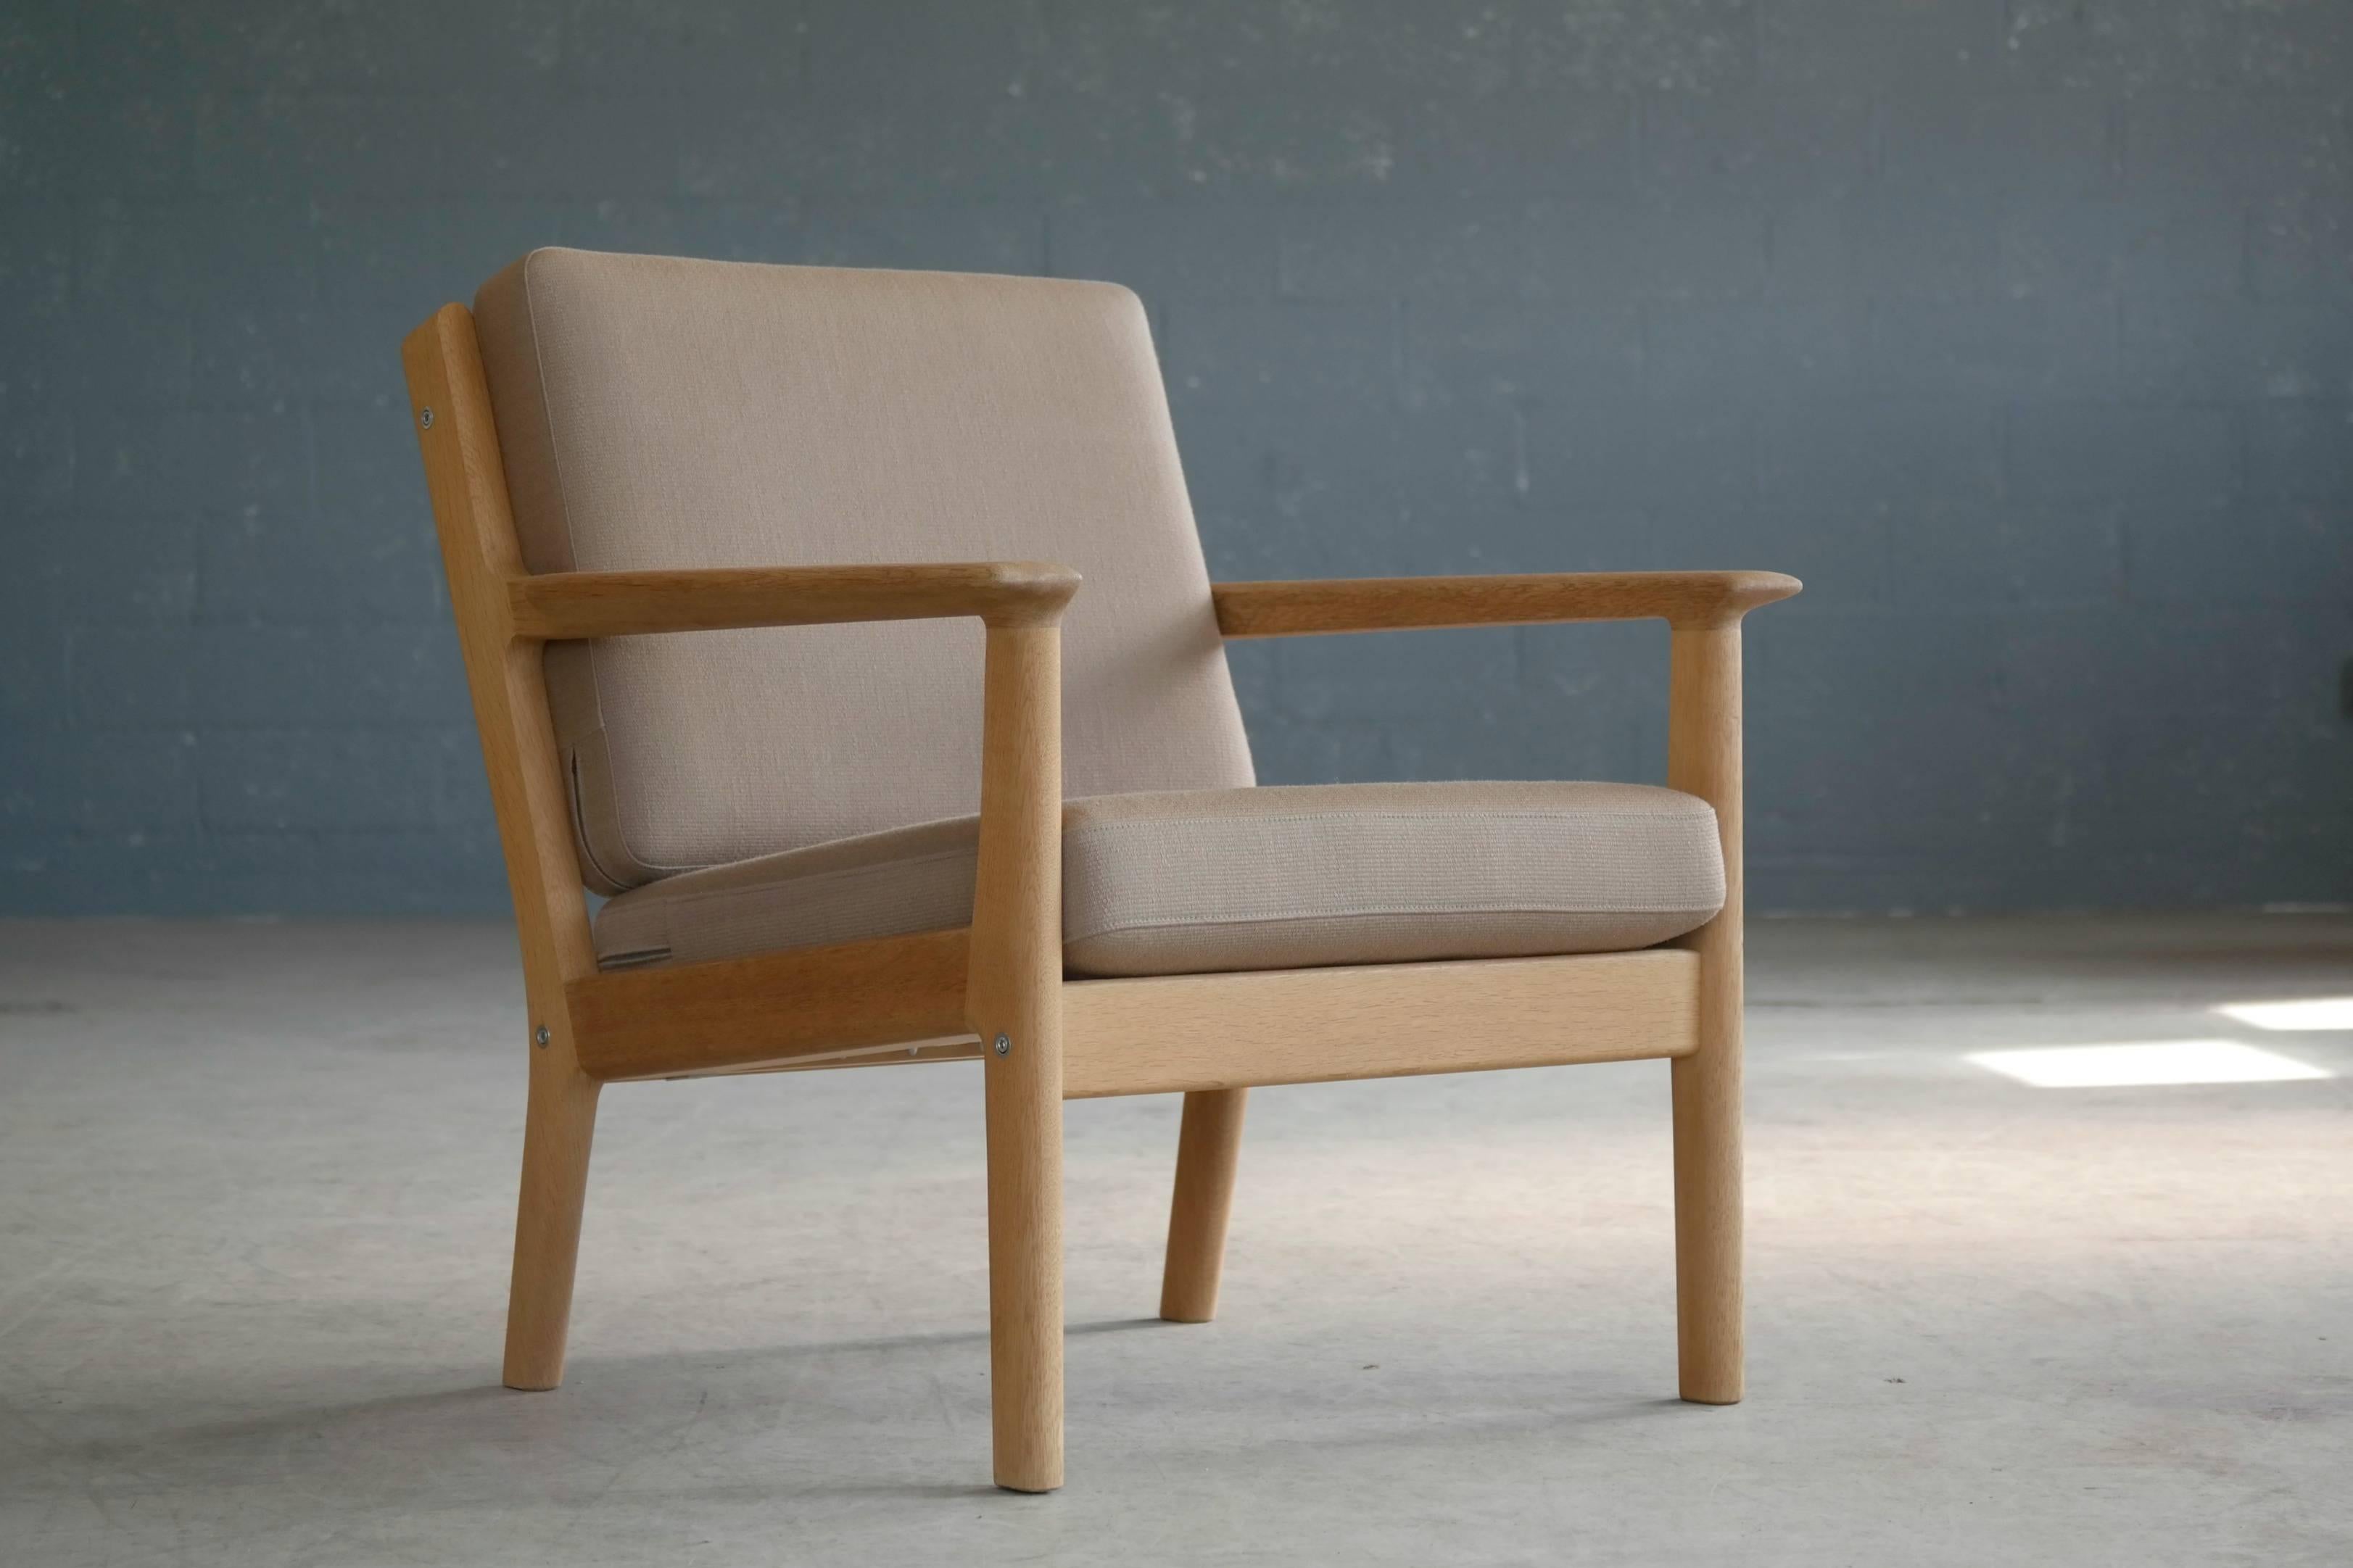 Elegant Hans Wegner designed easy chair made by GETAMA in the early 1970s featuring a solid oak frame and wool covered foam cushions. The cushions remain in their original wool. The chair is in excellent vintage condition with a nice patina. Very